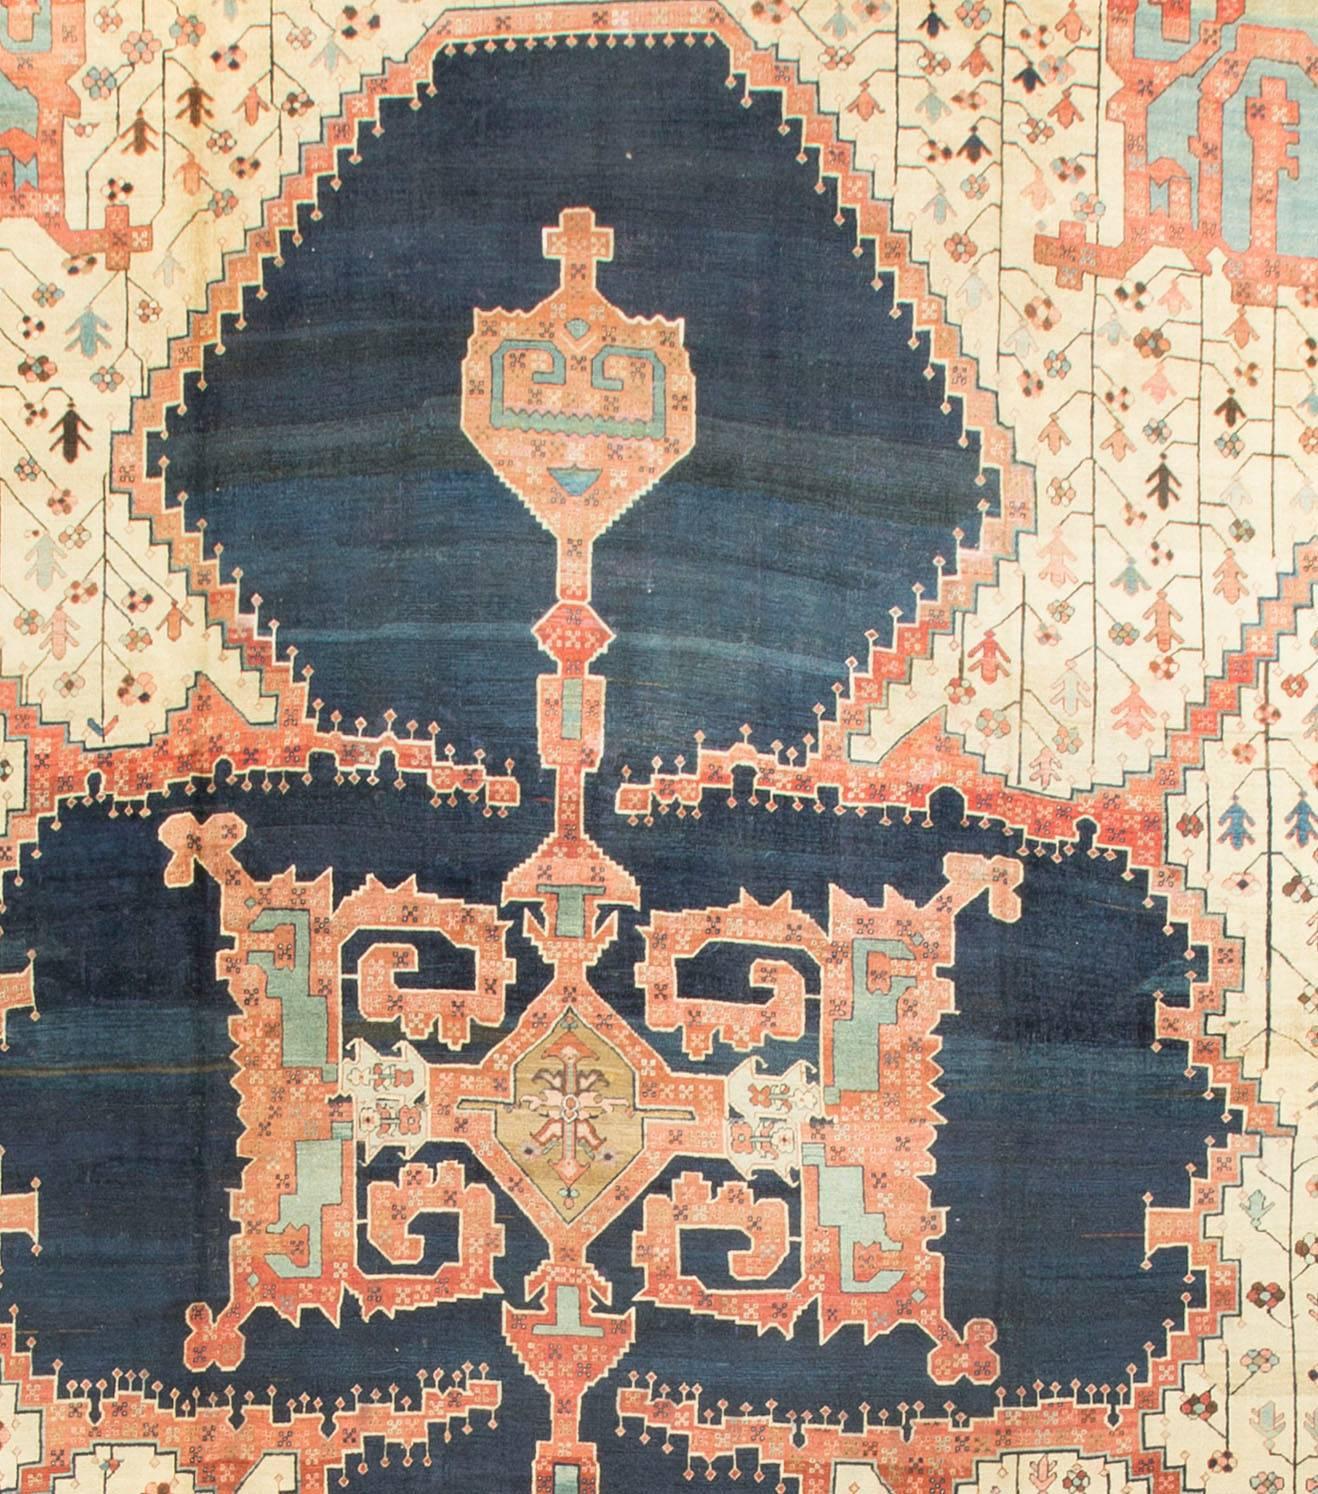 Oversize Antique Heriz Serapi Rug, circa 1890  15'10 x 20'. The small town of Heriz in North West Persia is the centre of one of the most important weaving areas in Azerbaijan and has given its name to one of the most distinctive styles with its